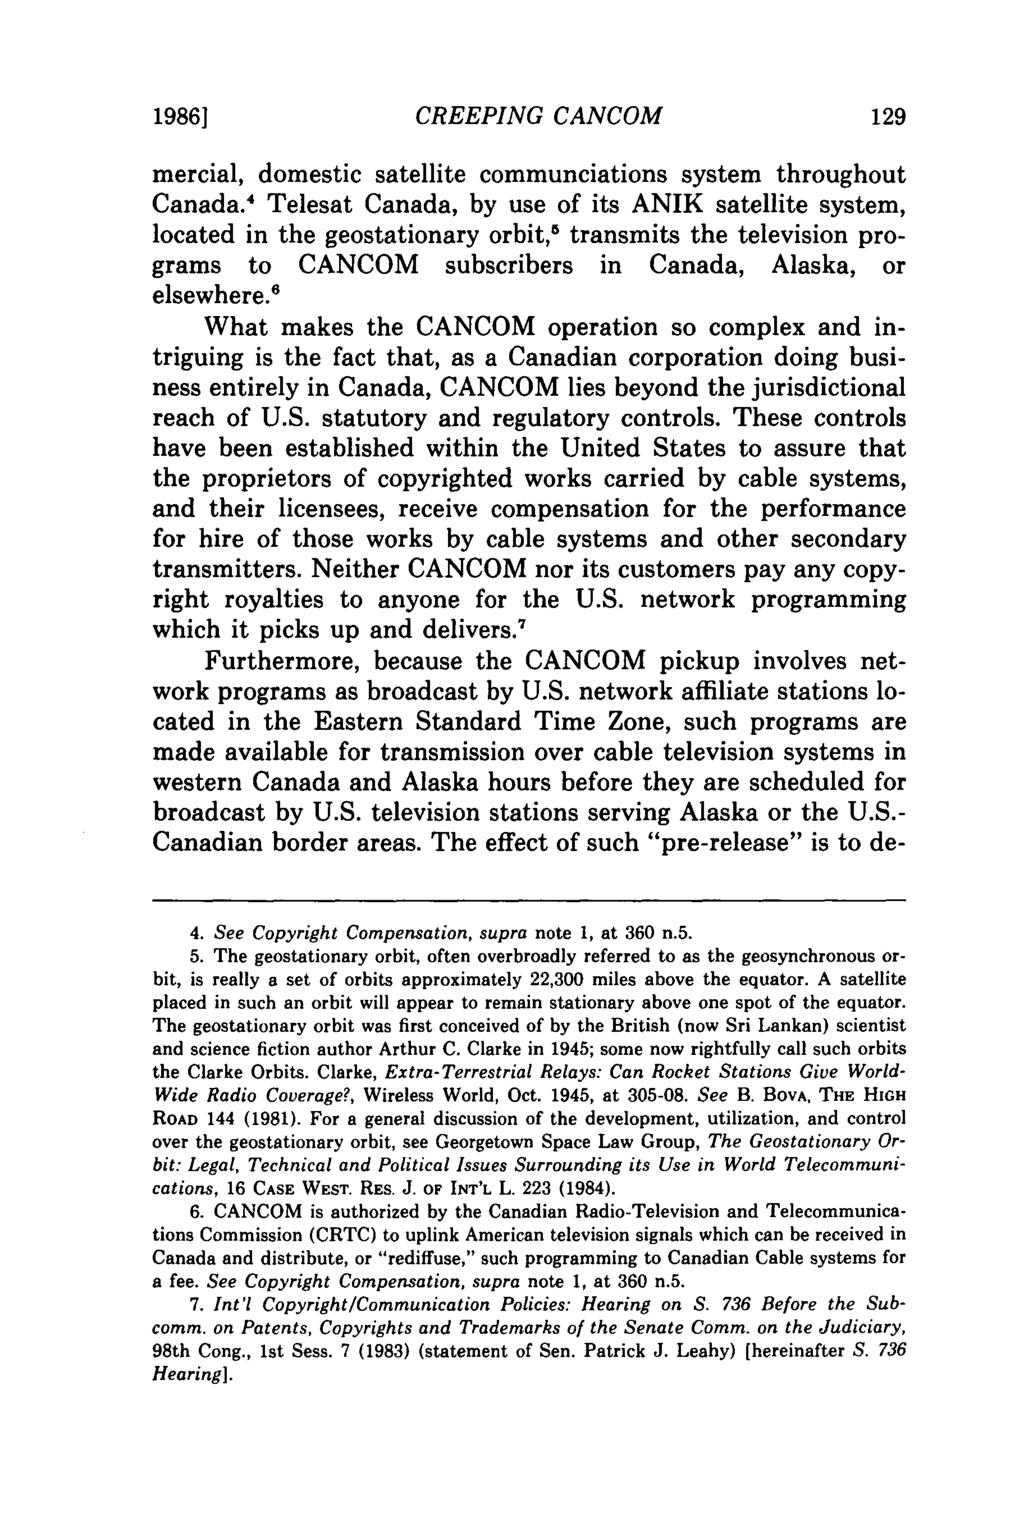 19861 CREEPING CANCOM mercial, domestic satellite communciations system throughout Canada.